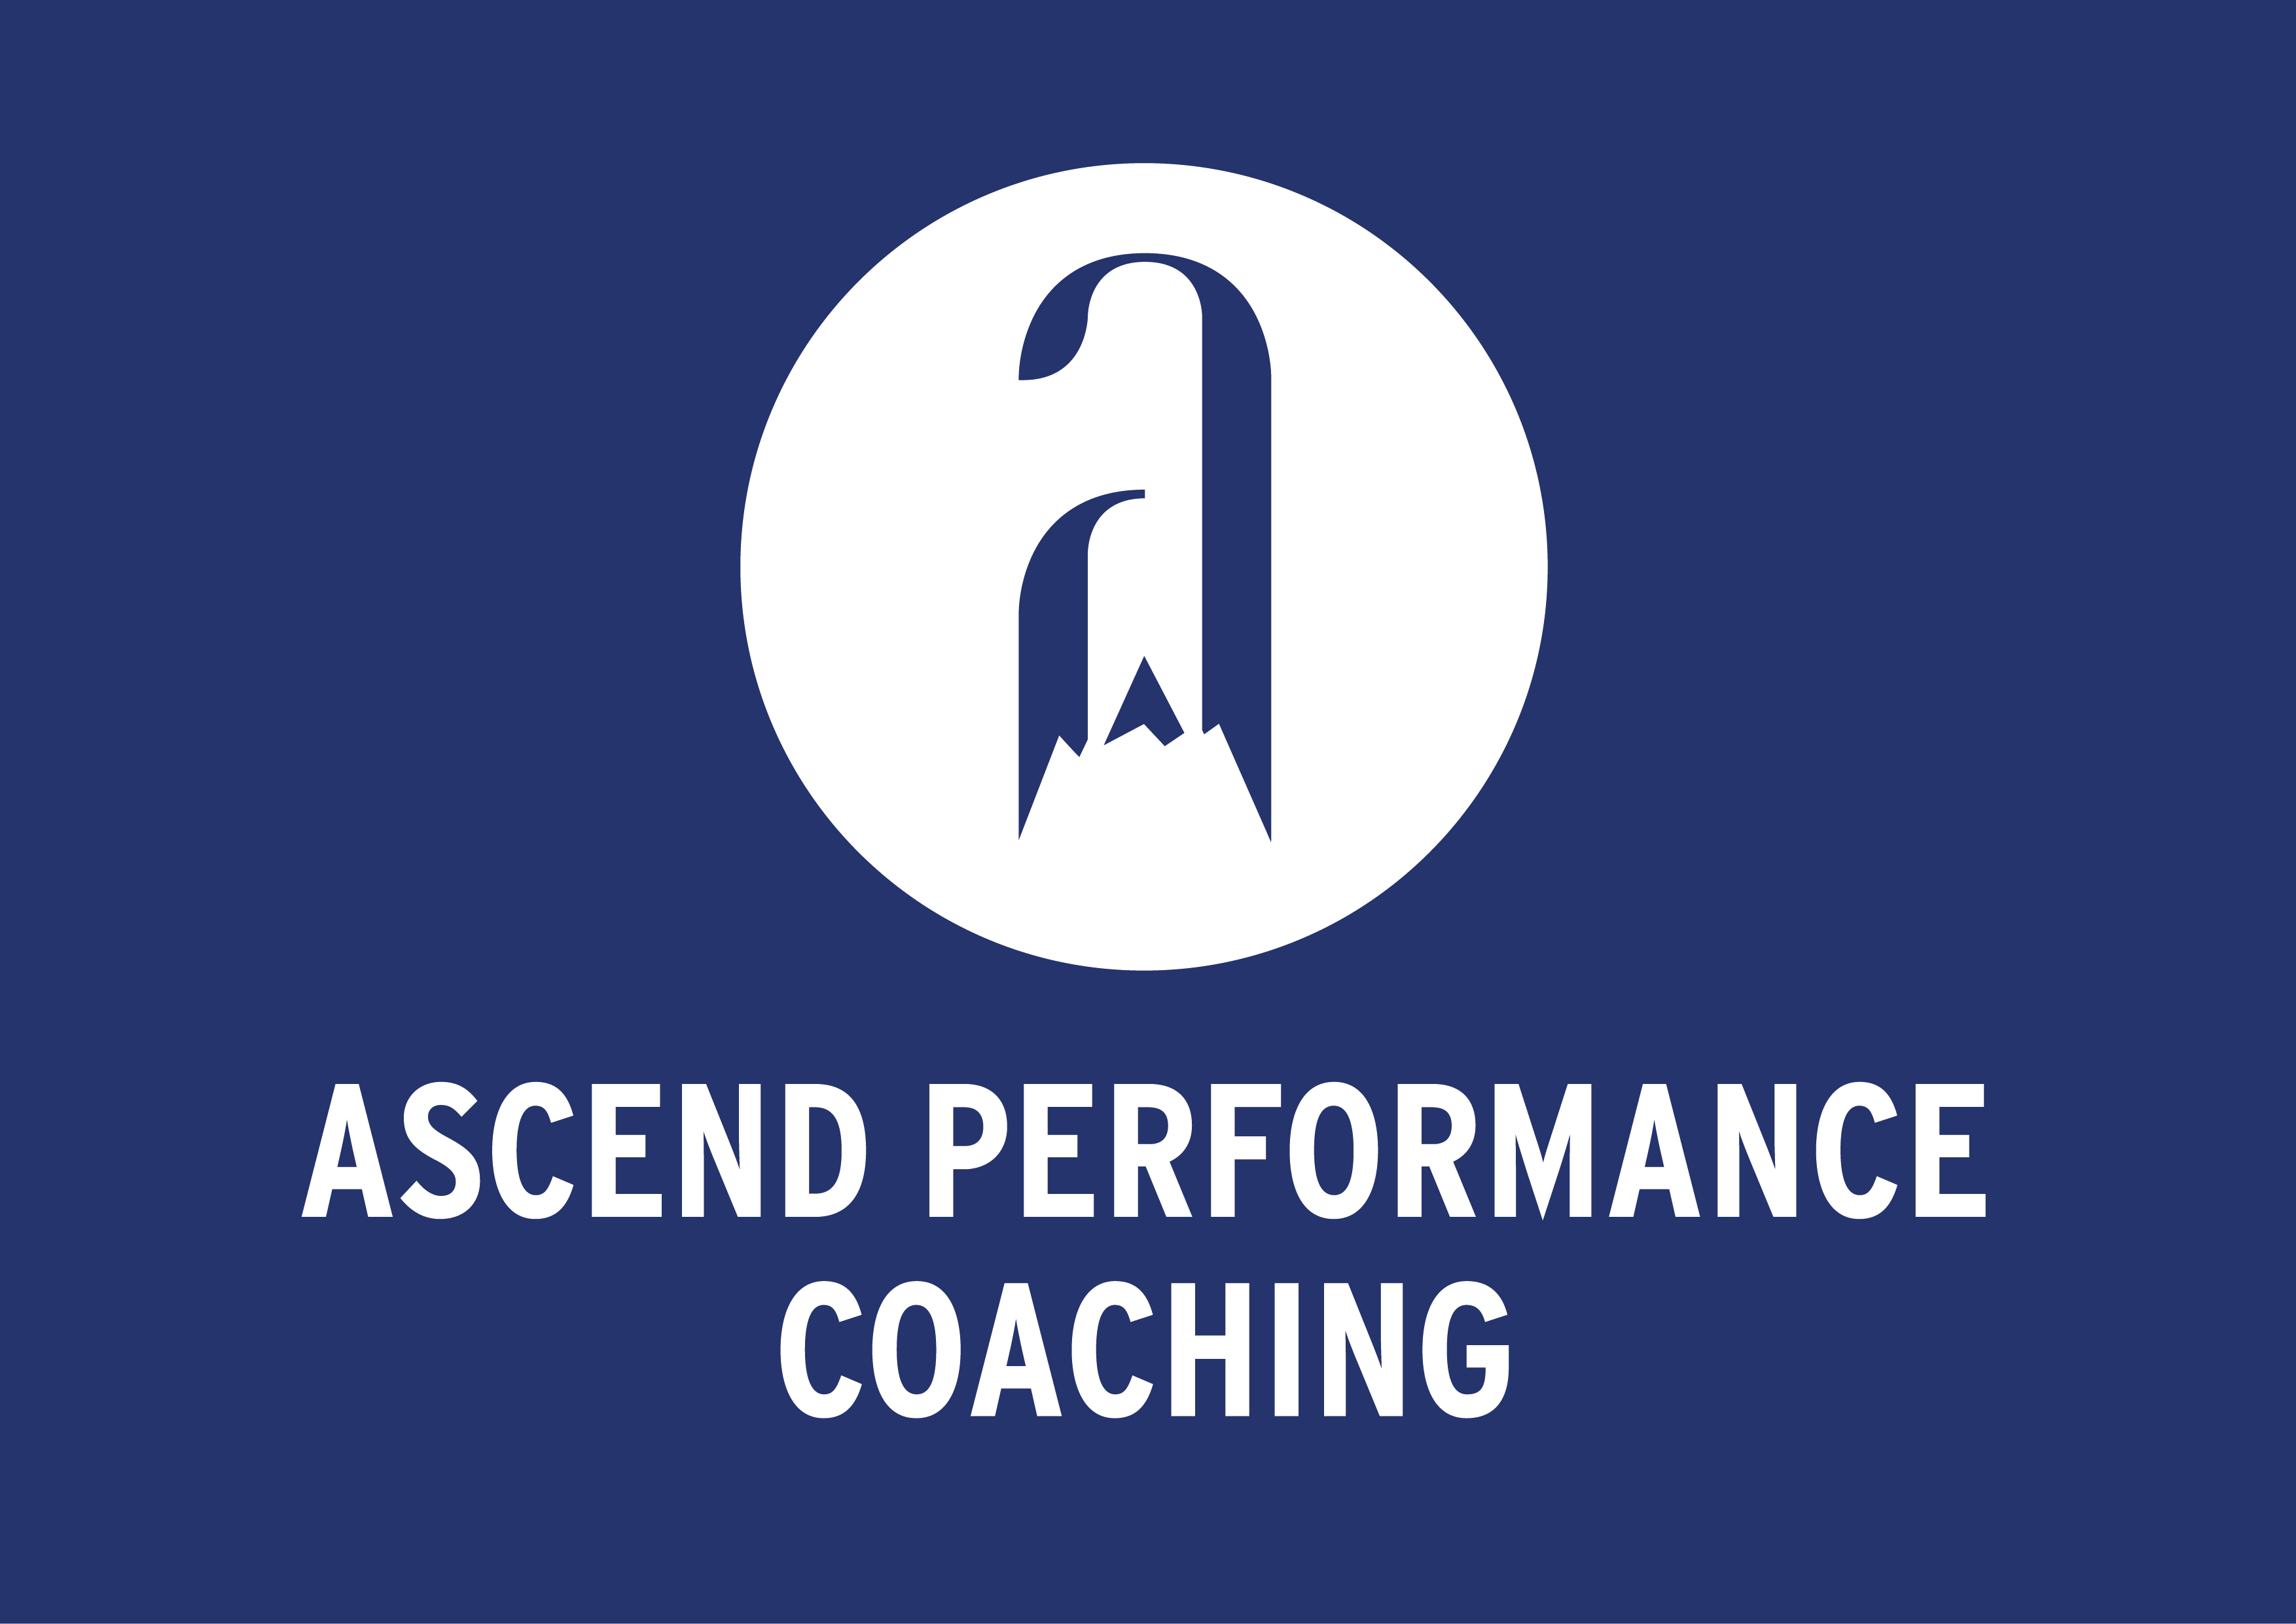 Ascend Performance Coaching